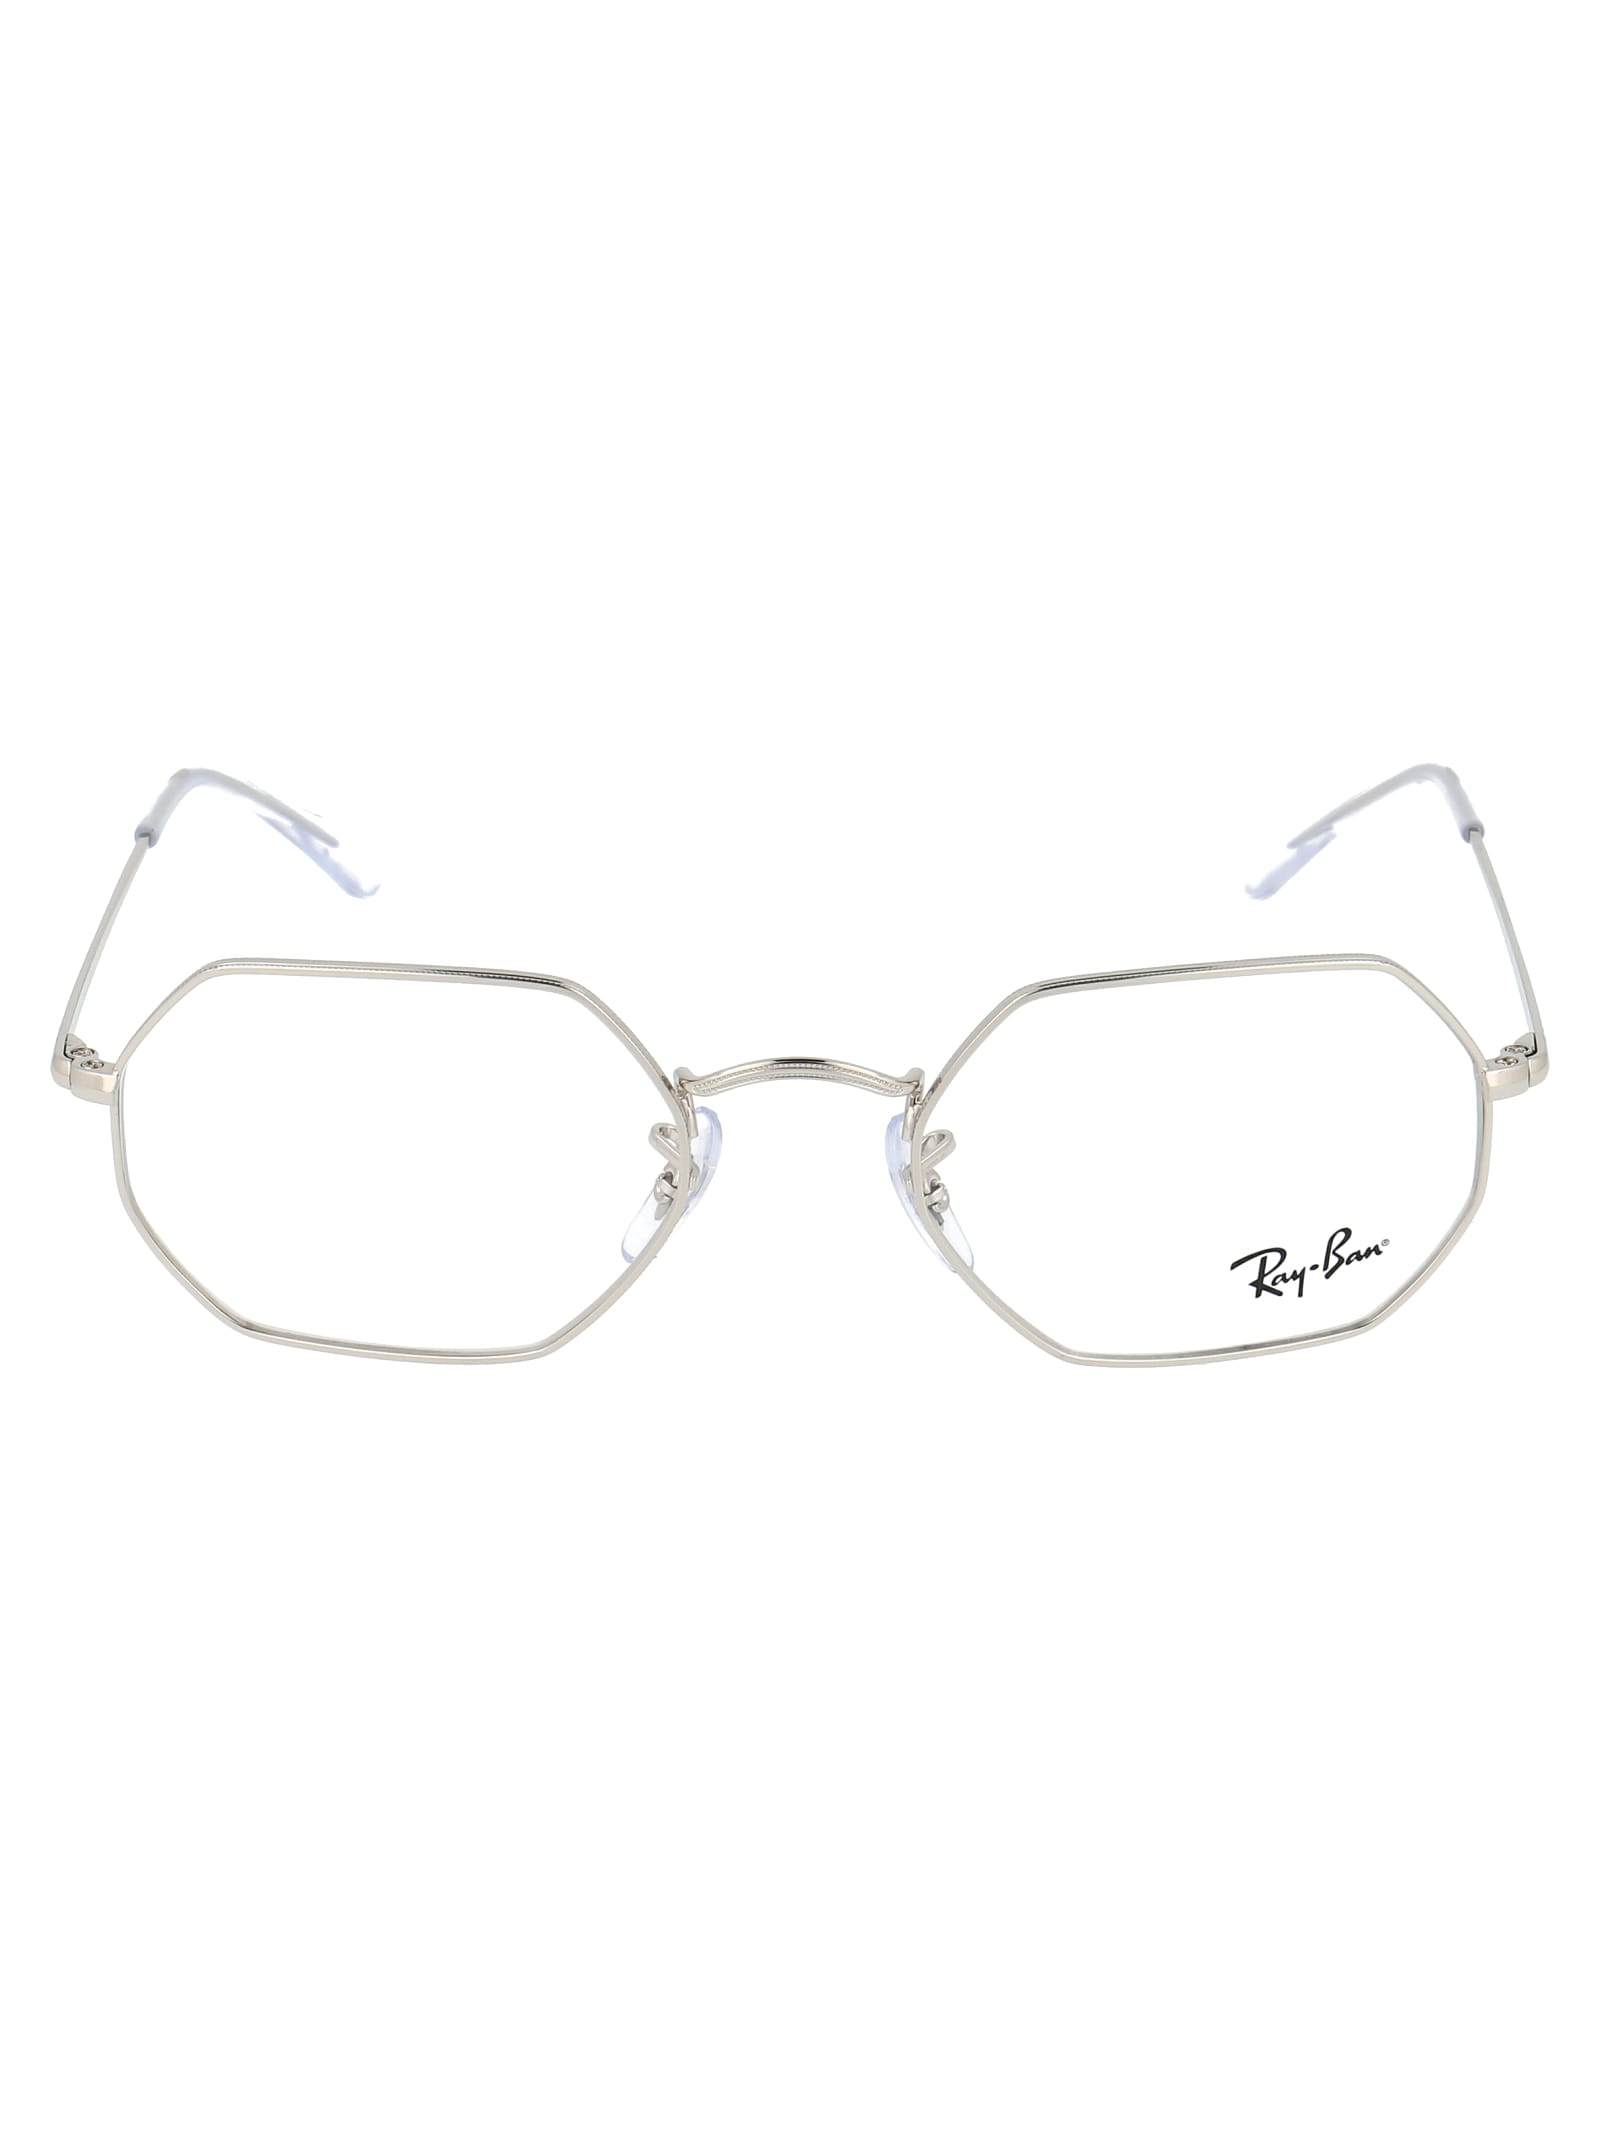 Ray Ban 0rx6456 Glasses In 2501 Silver